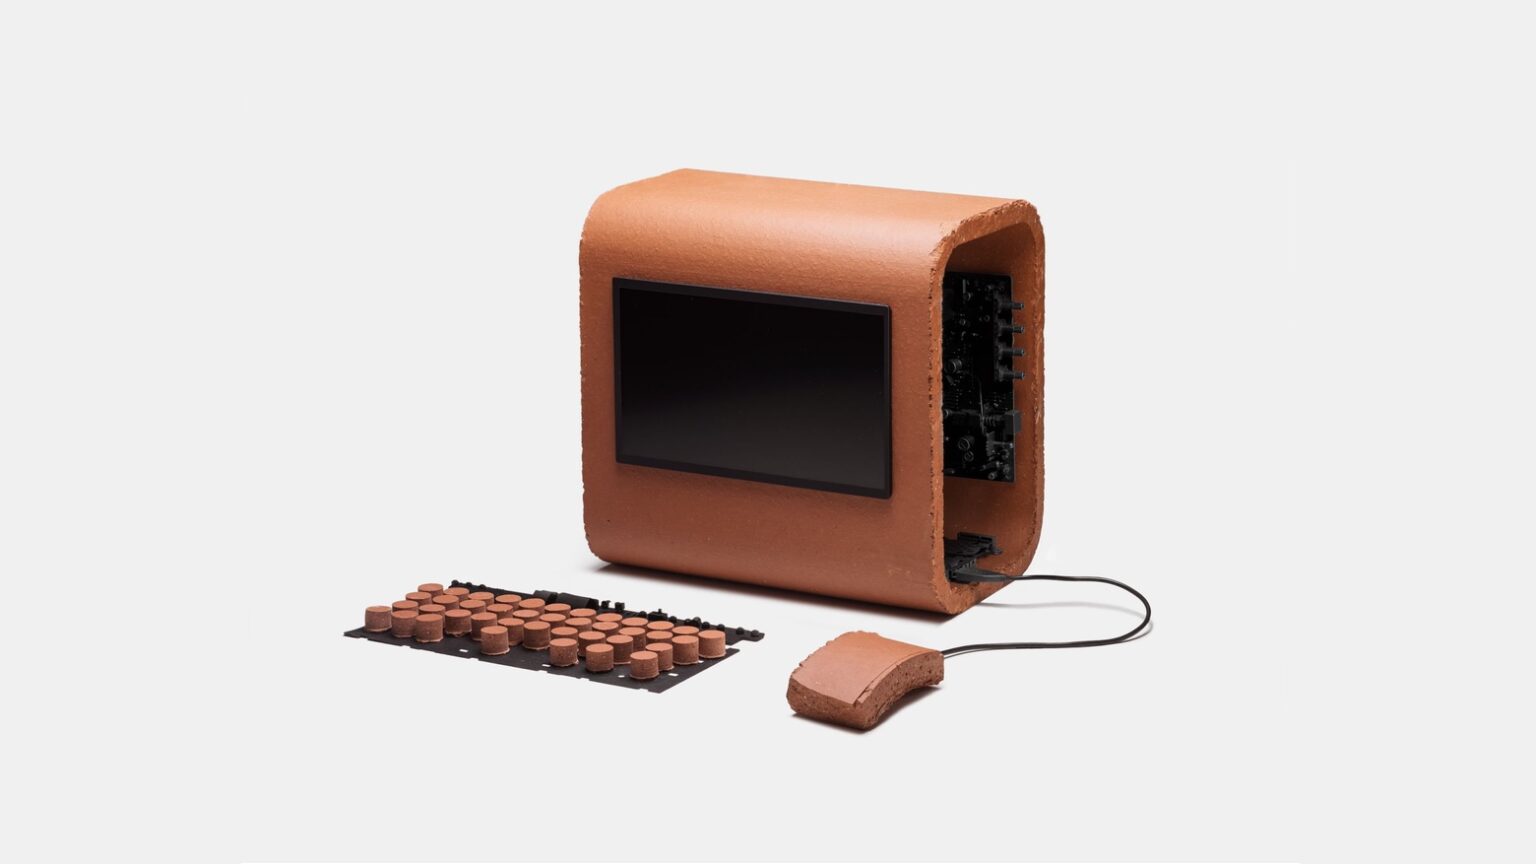 This concept Mac is made of sandstone.